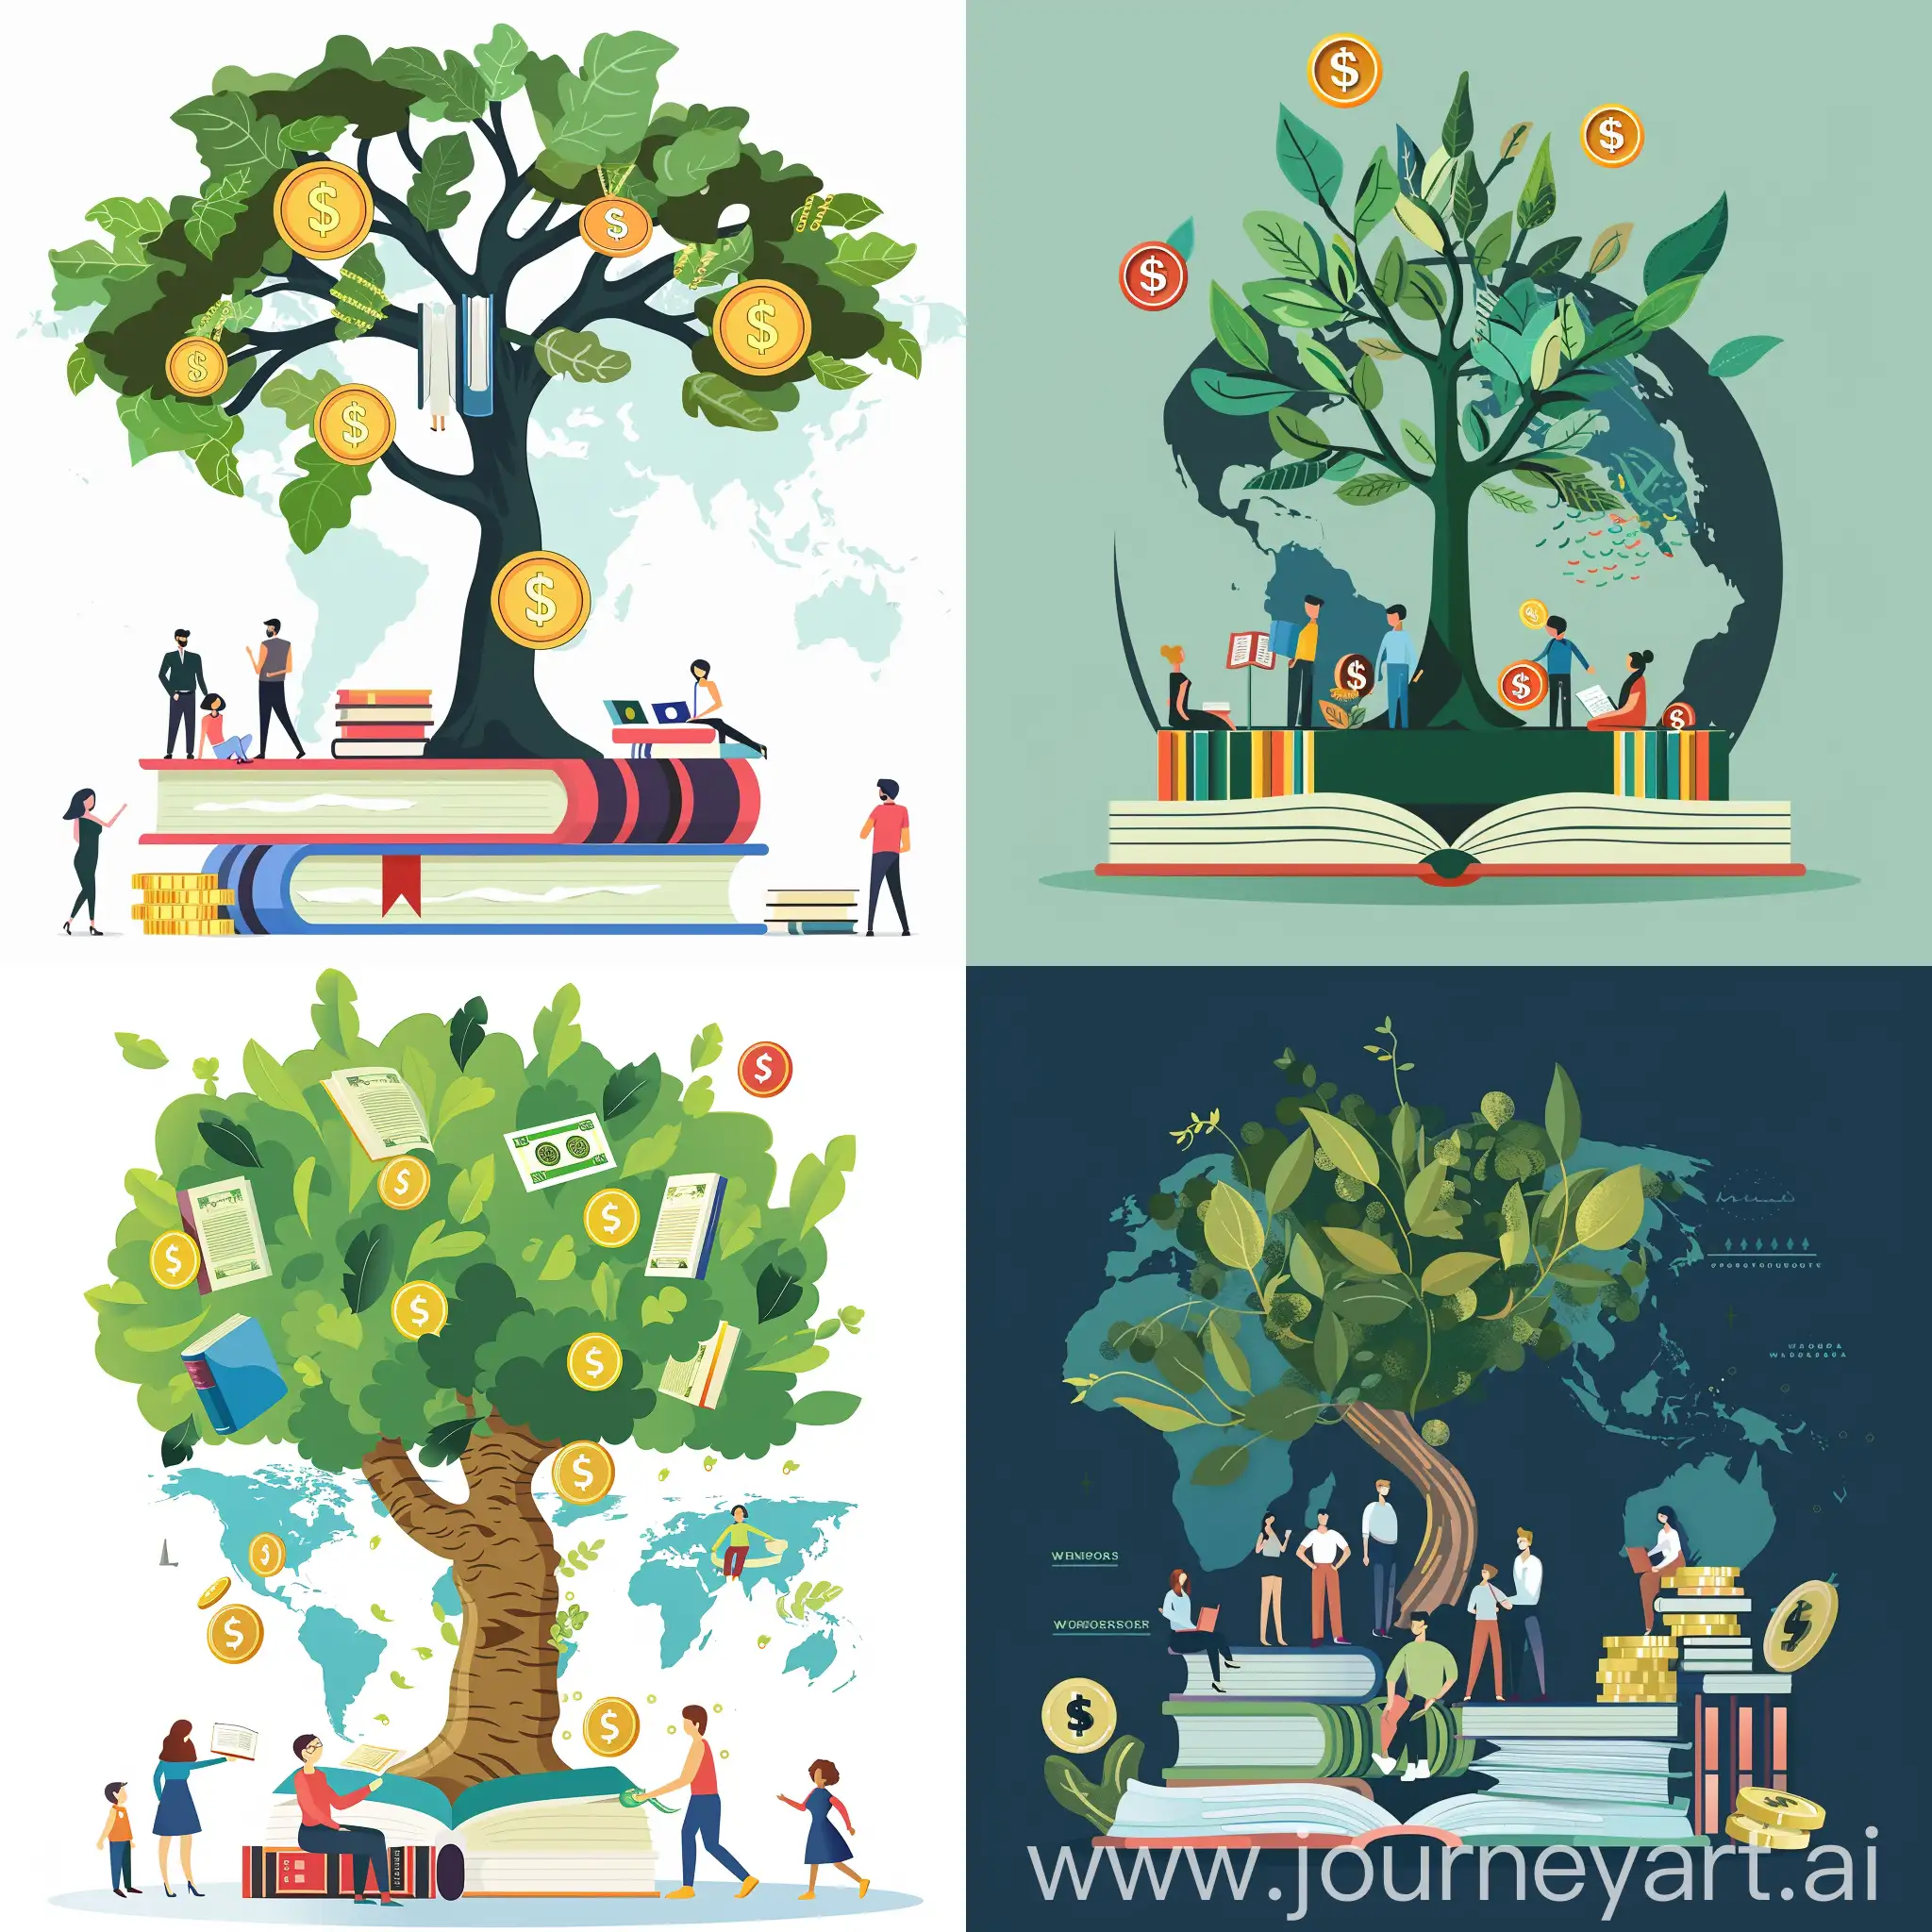 catchy real picture underlying the opportunity of paid trainings and services, showing a tree for the growing aspect, books for the training aspect, world for the worldwide aspect, people, something representing the future, coins or money for the investment aspect and the fact we talk about paid trainings and investment and that it will be profitable